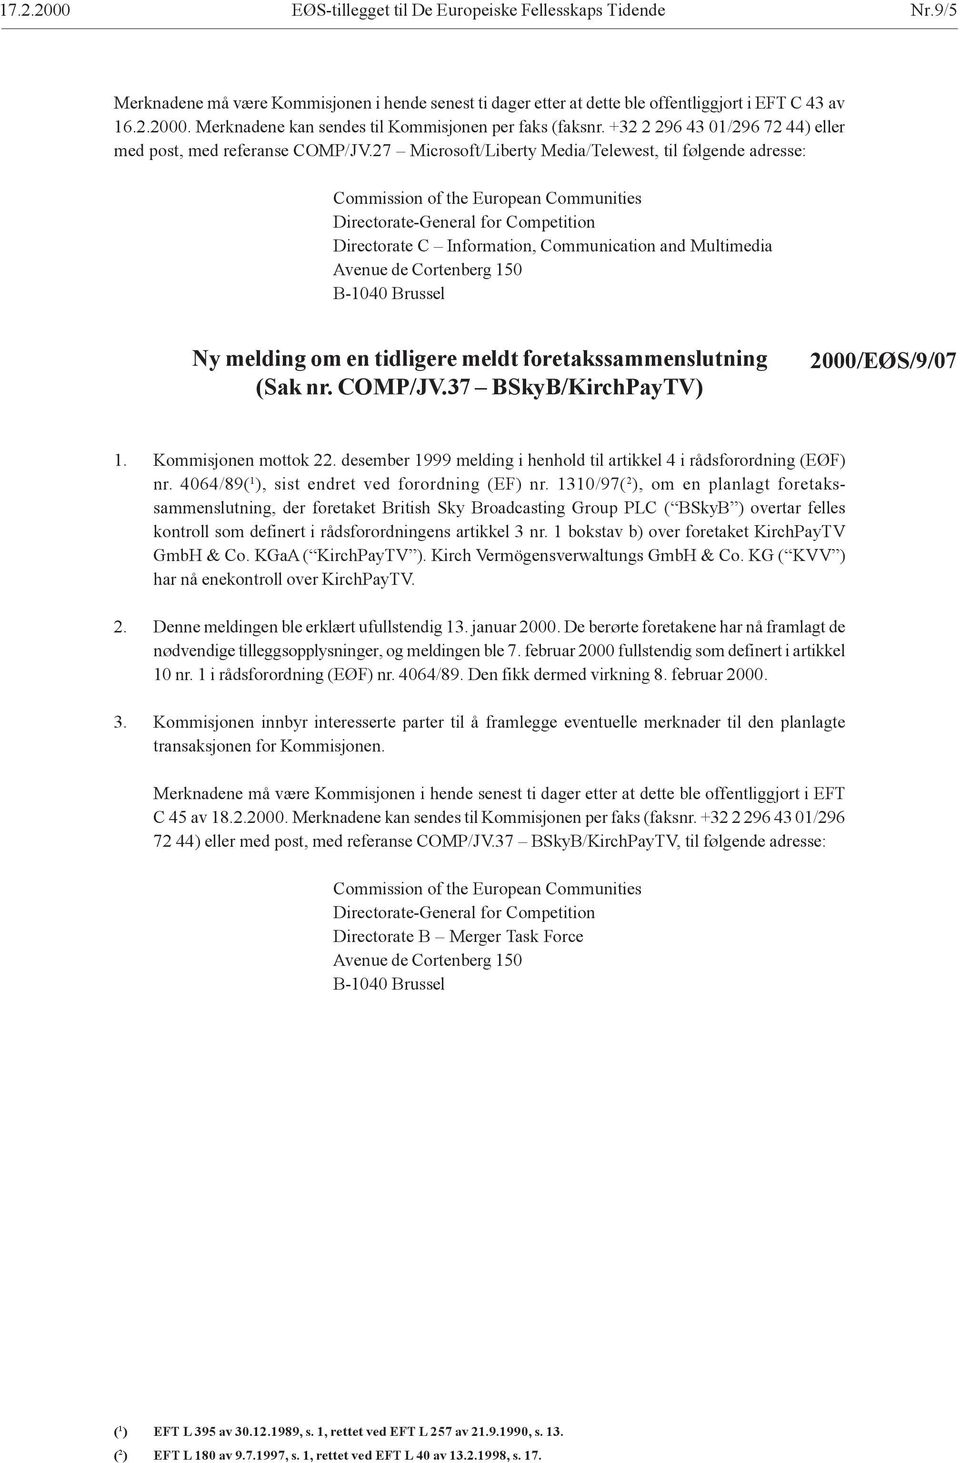 27 Microsoft/Liberty Media/Telewest, til følgende adresse: Commission of the European Communities Directorate-General for Competition Directorate C Information, Communication and Multimedia Avenue de